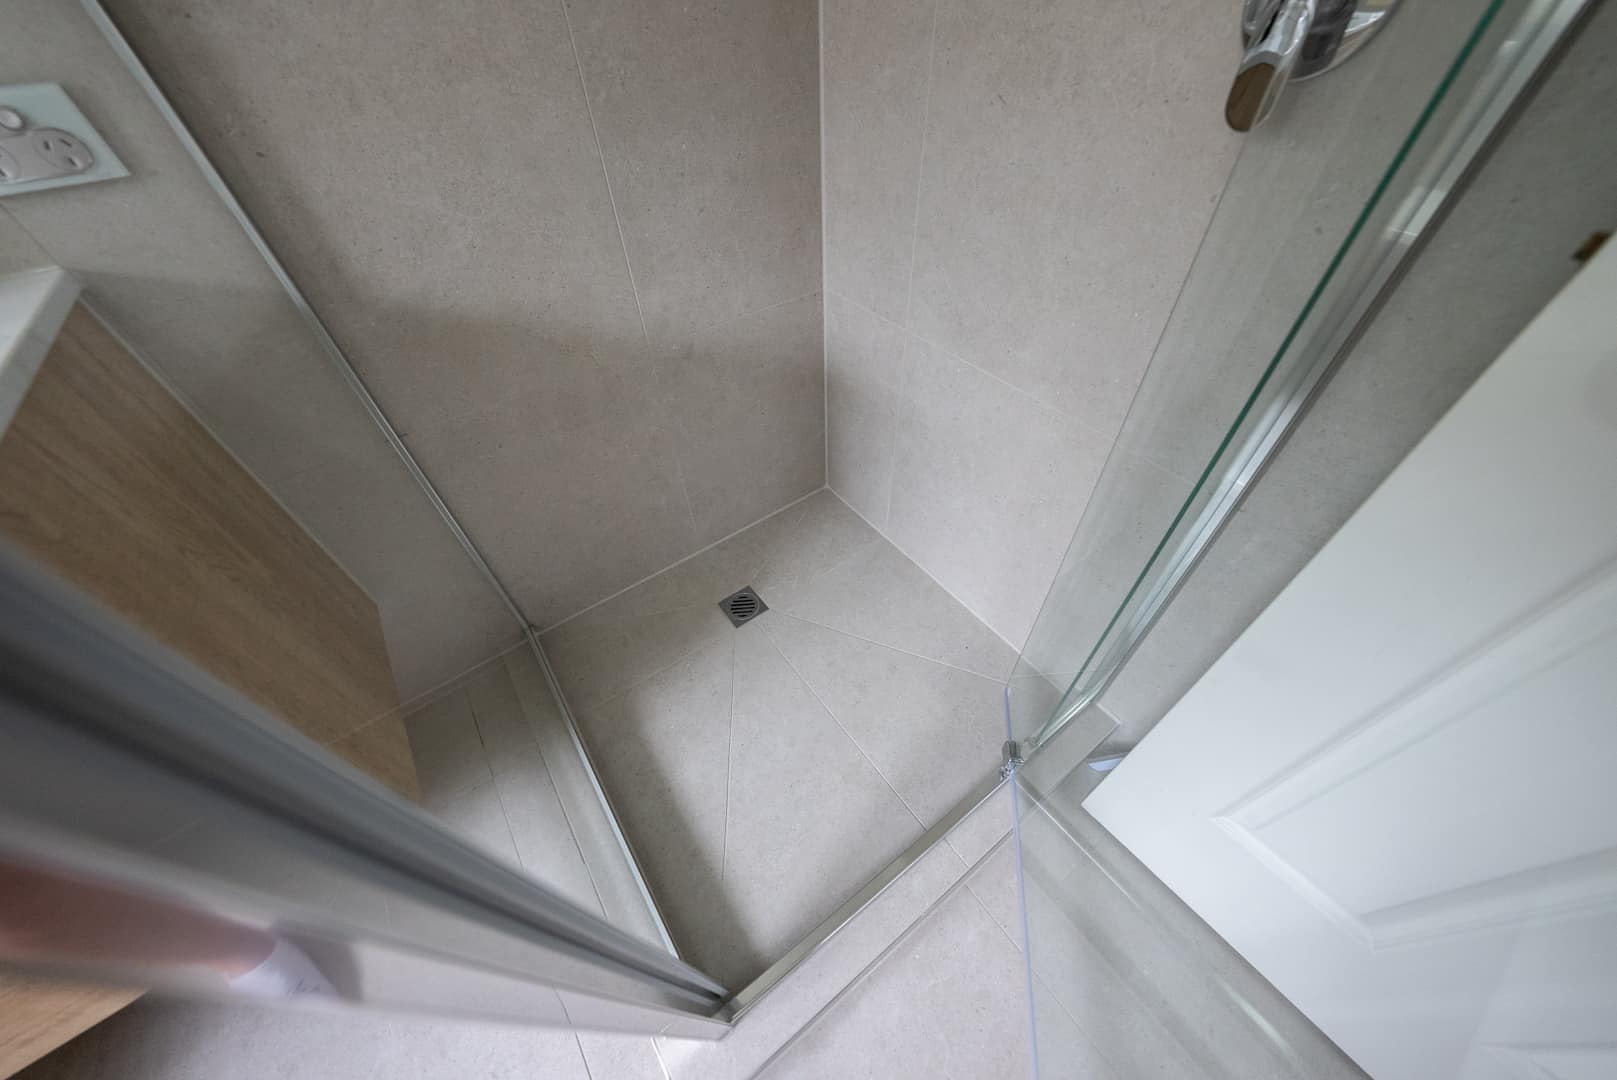 Tiled Shower Base replacements - The Shower Man Melbourne